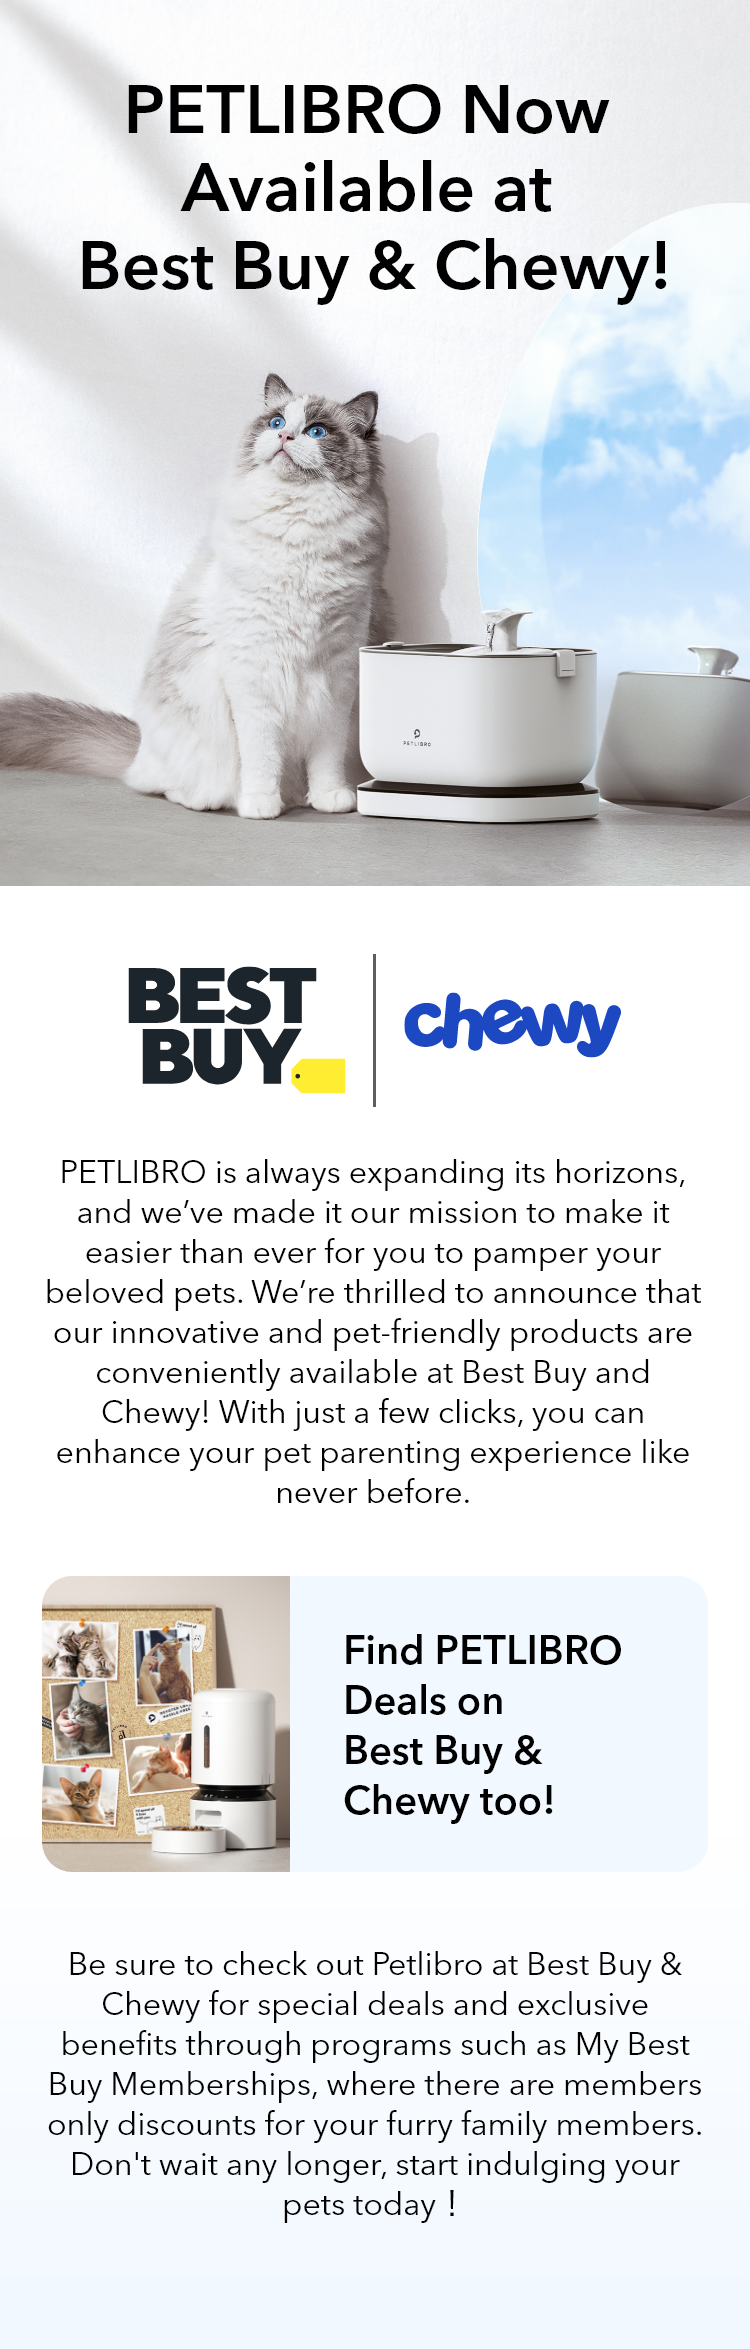 PETLIBRO Now Available at Best Buy & Chewy!